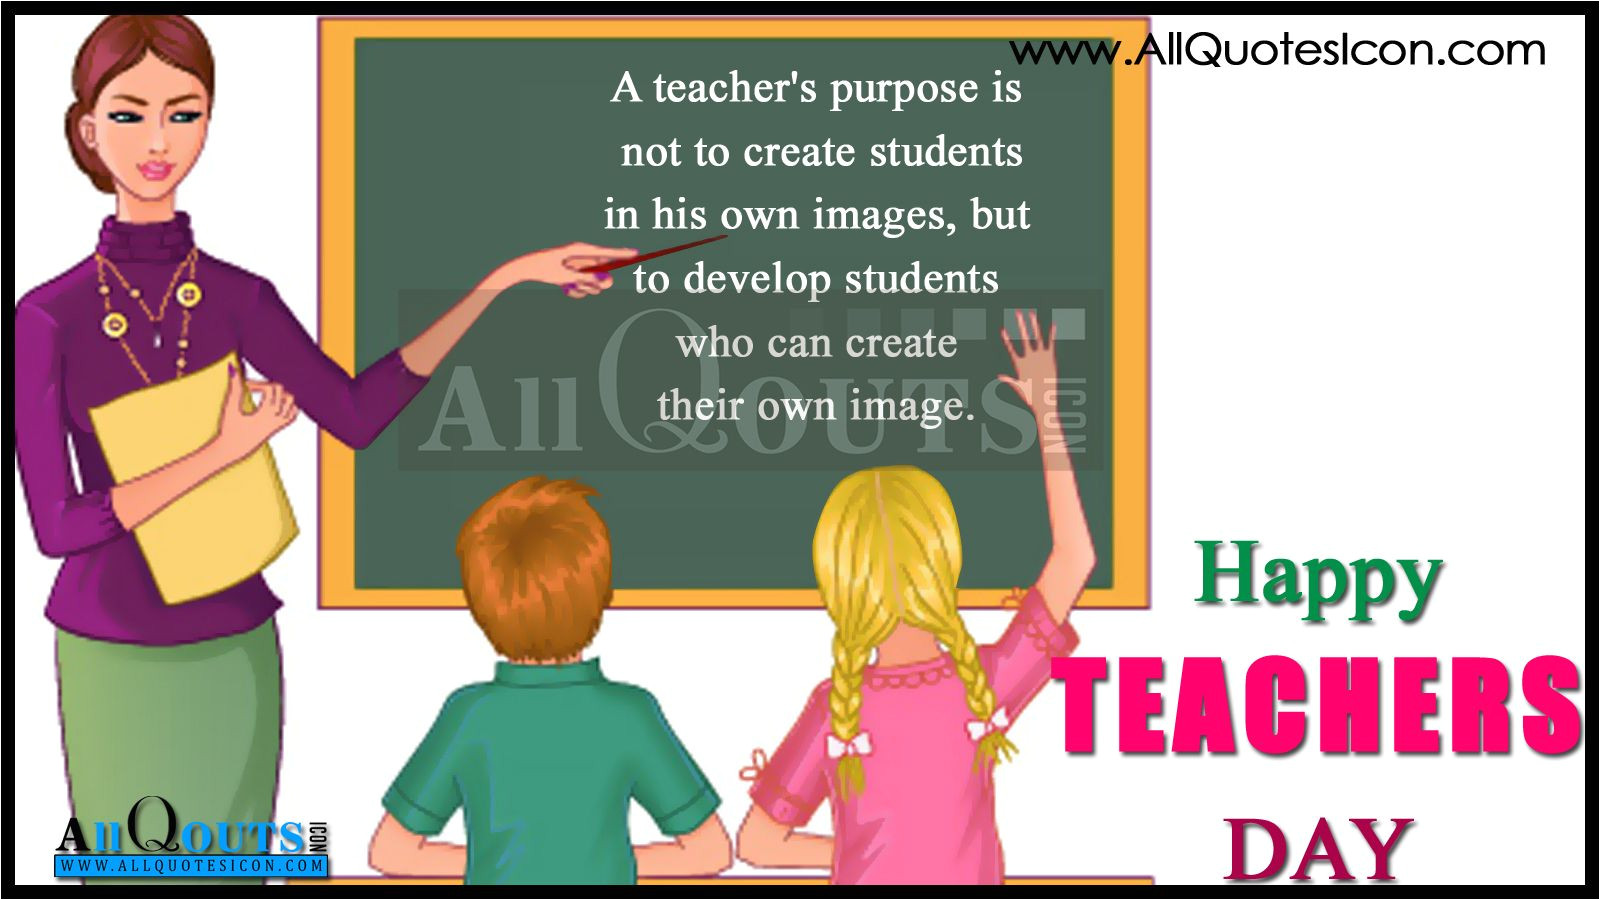 Teachers Day Card Very Beautiful 33 Teacher Day Messages to Honor Our Teachers From Students